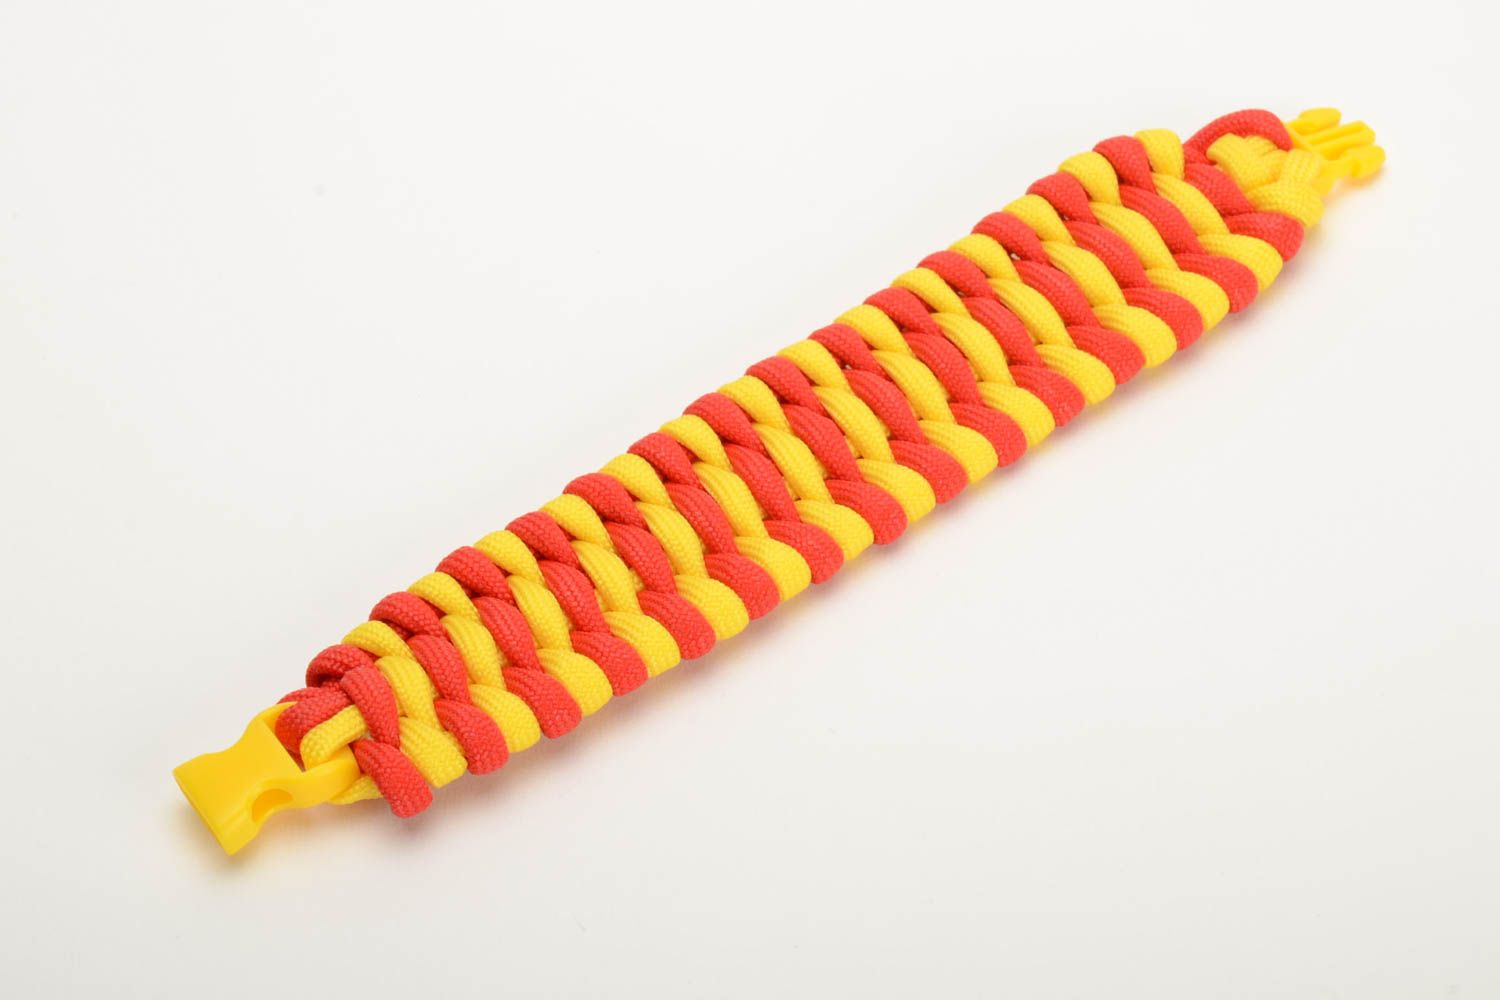 Handmade wide survival wrist bracelet woven of yellow and red paracords unisex photo 4